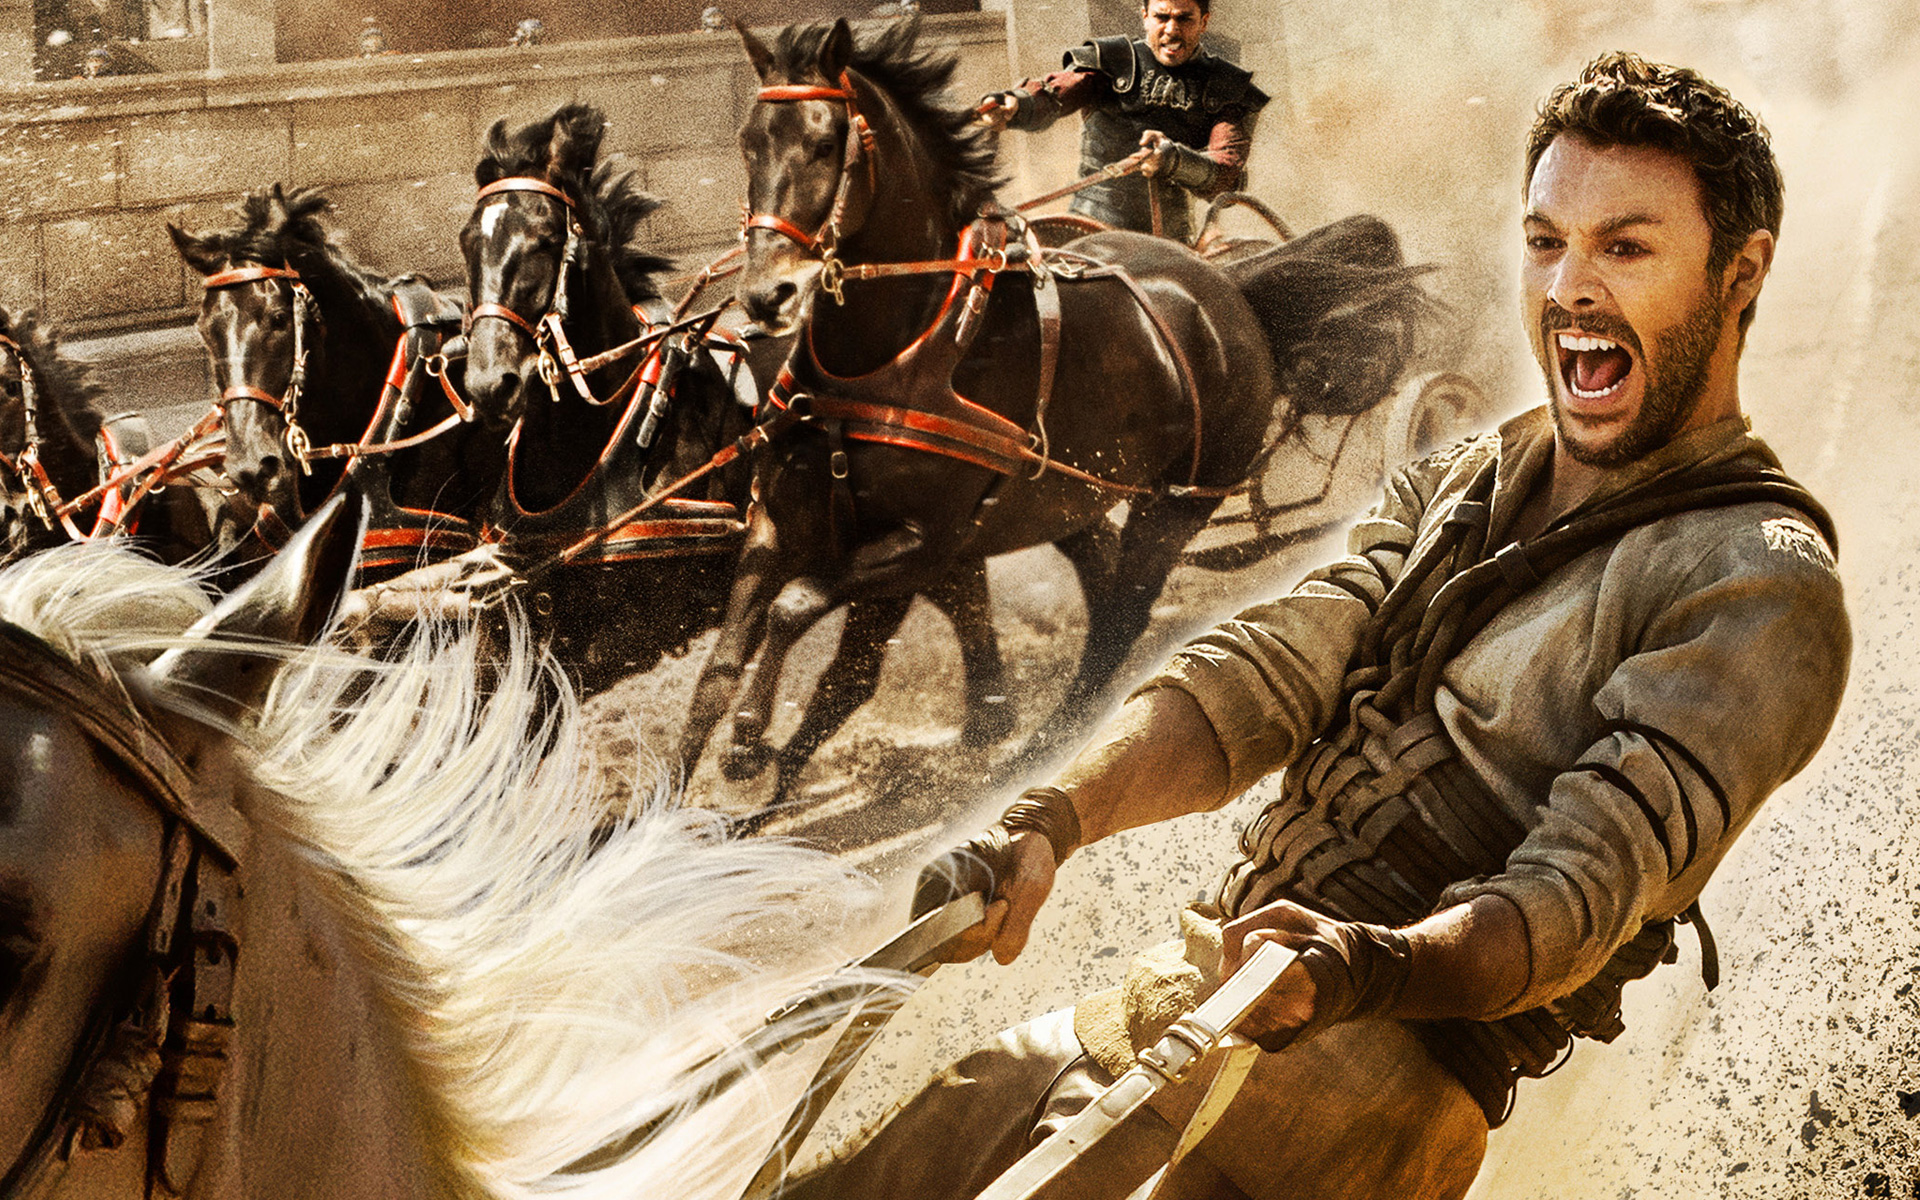 The New BEN HUR is better than the Canadian Miniseries Version. Let’s focus on the positive…..